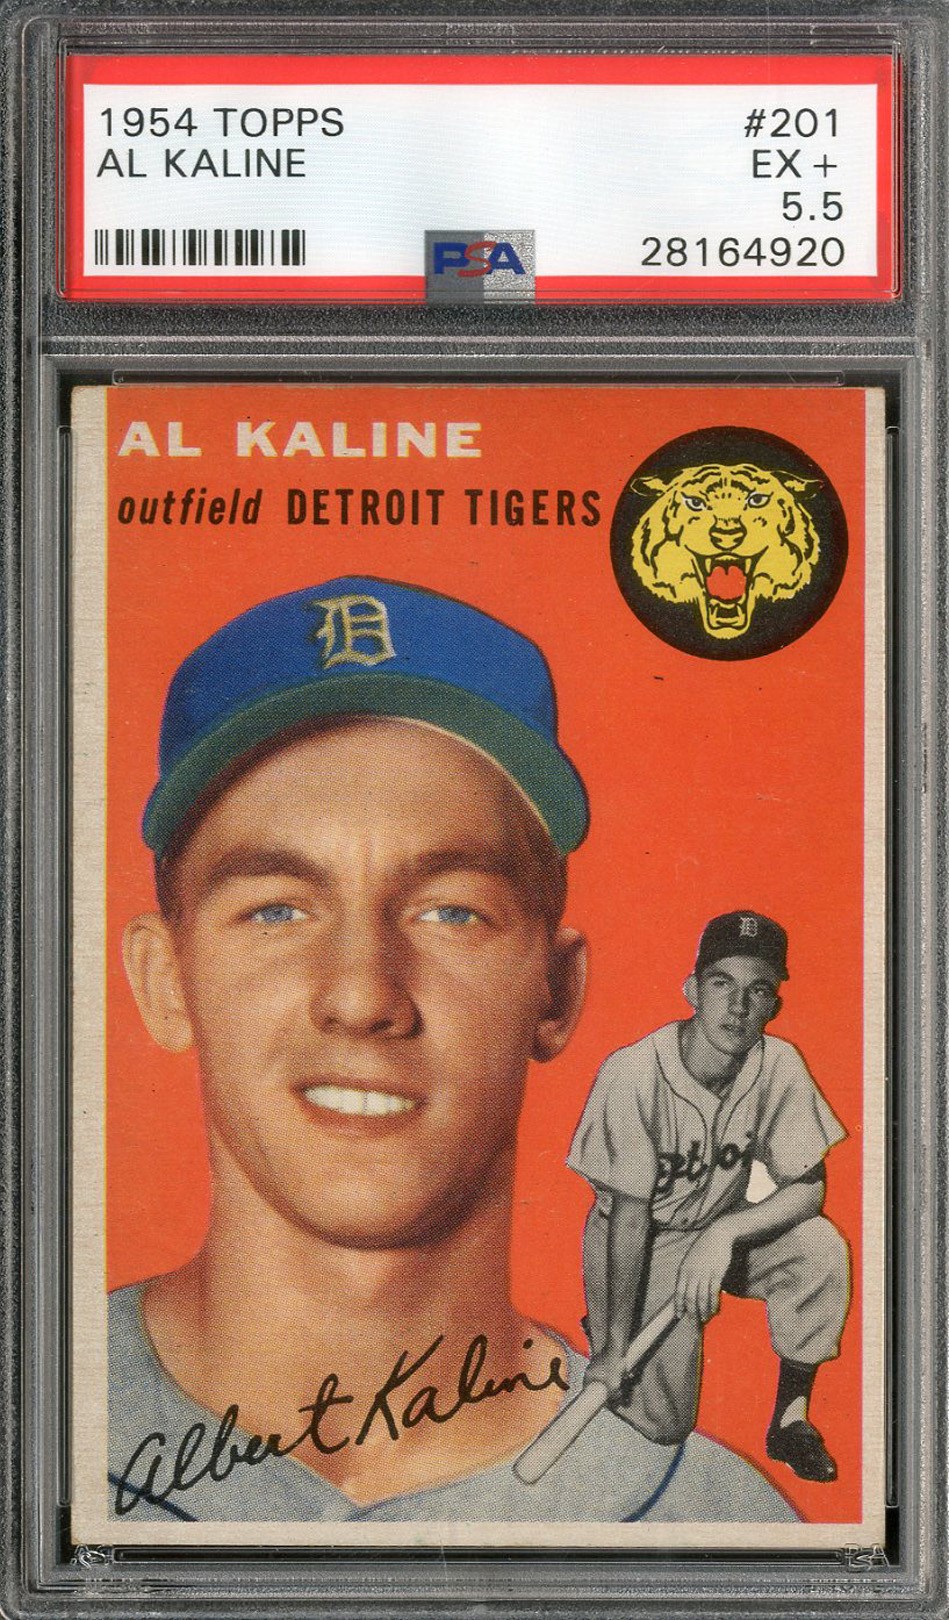 Baseball and Trading Cards - 1954 Topps #201 Al Kaline Rookie Card - PSA EX+ 5.5